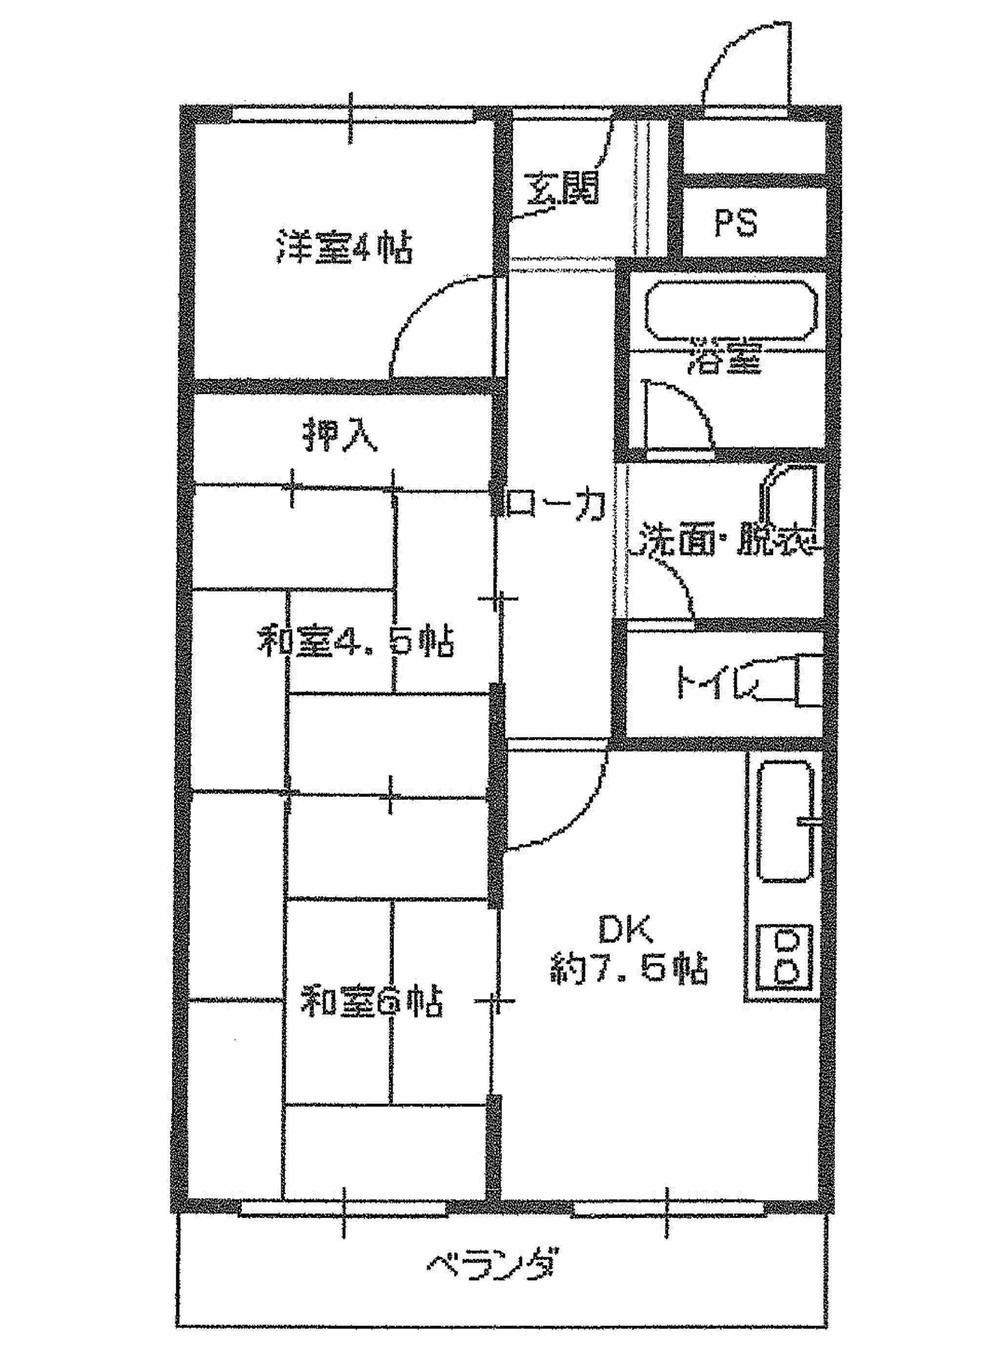 Floor plan. 3DK, Price 8.8 million yen, Occupied area 51.84 sq m , Balcony area 5.94 sq m ◇ completely renovated ・ Immediate Available ◇ Pets Allowed